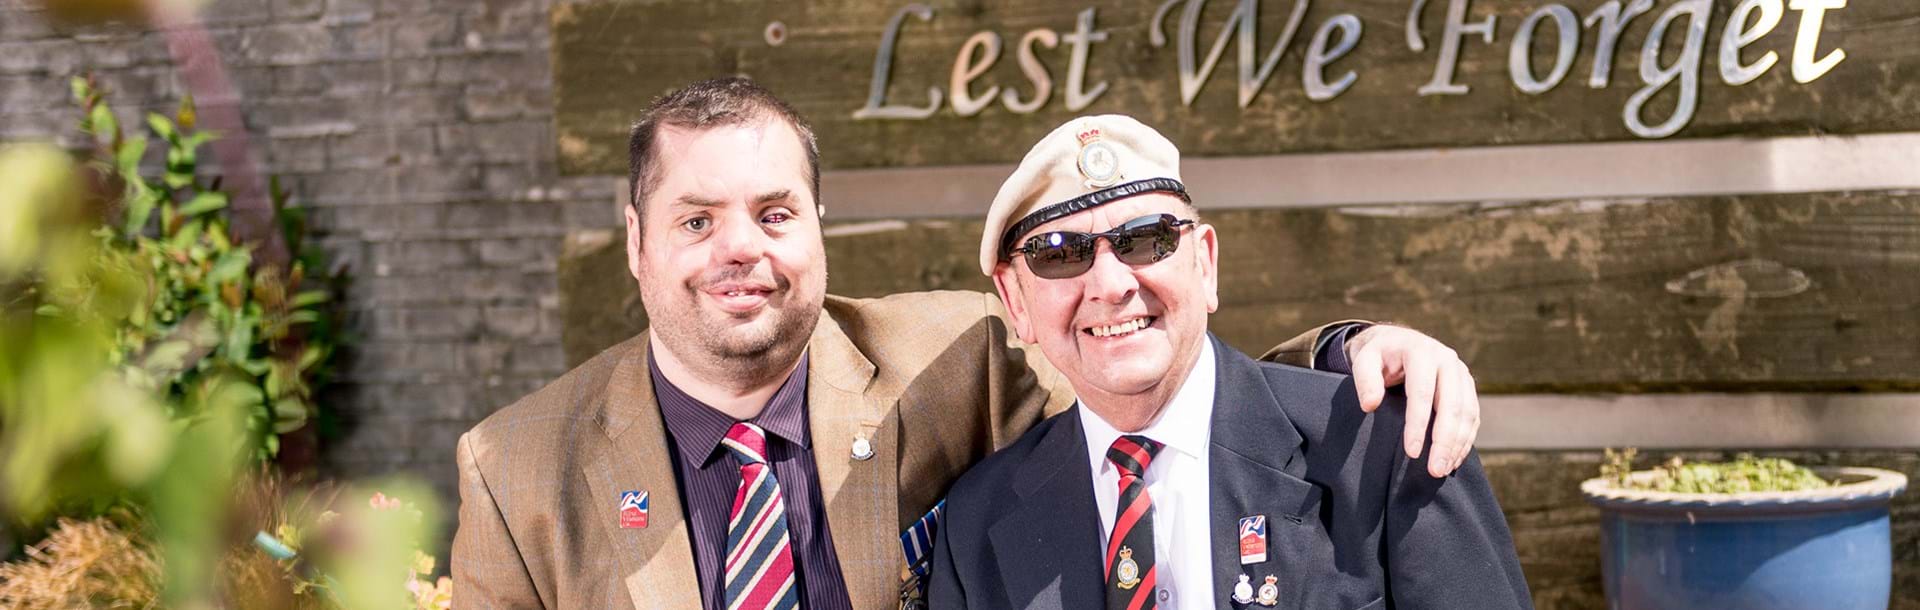 Blind veteran Simon pictured with his arm around fellow blind veteran Tony, they're both smiling as they sit in front of a sign that reads "Lest We Forget"